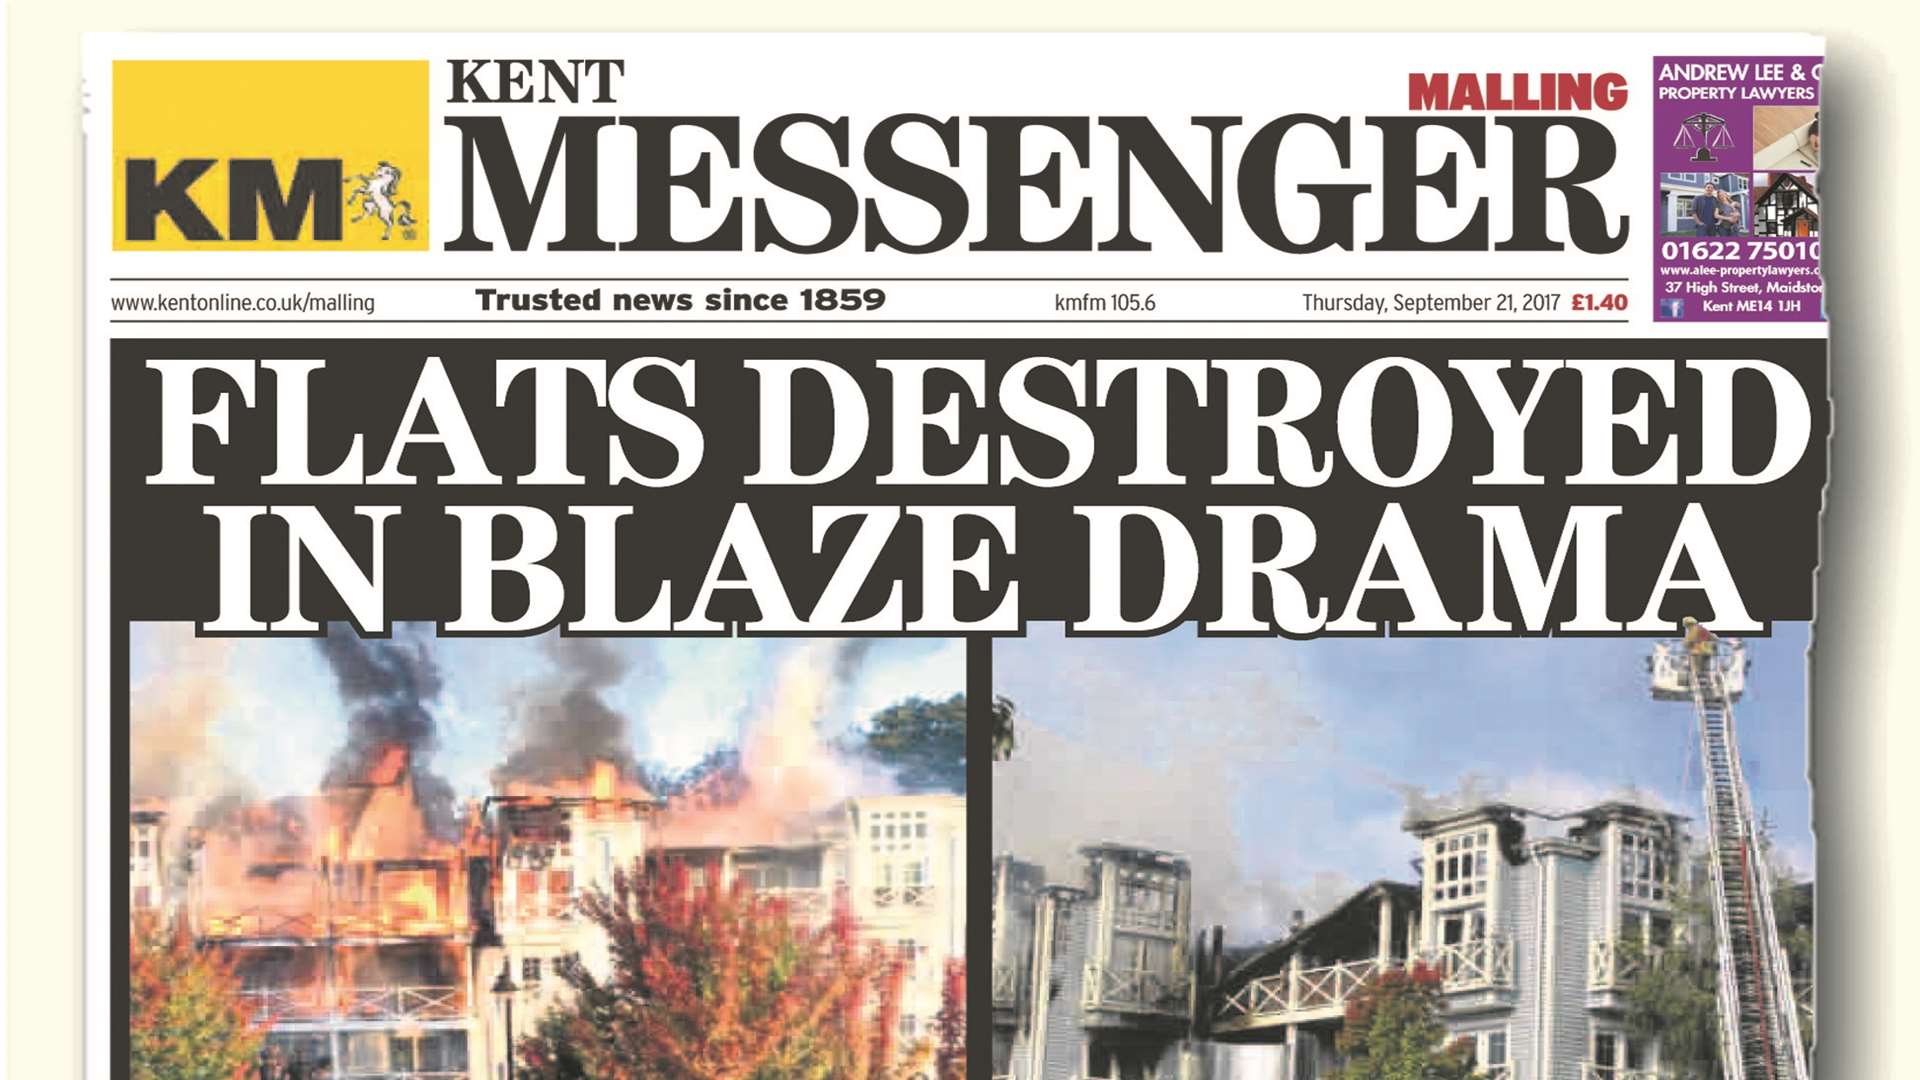 How we reported the blaze